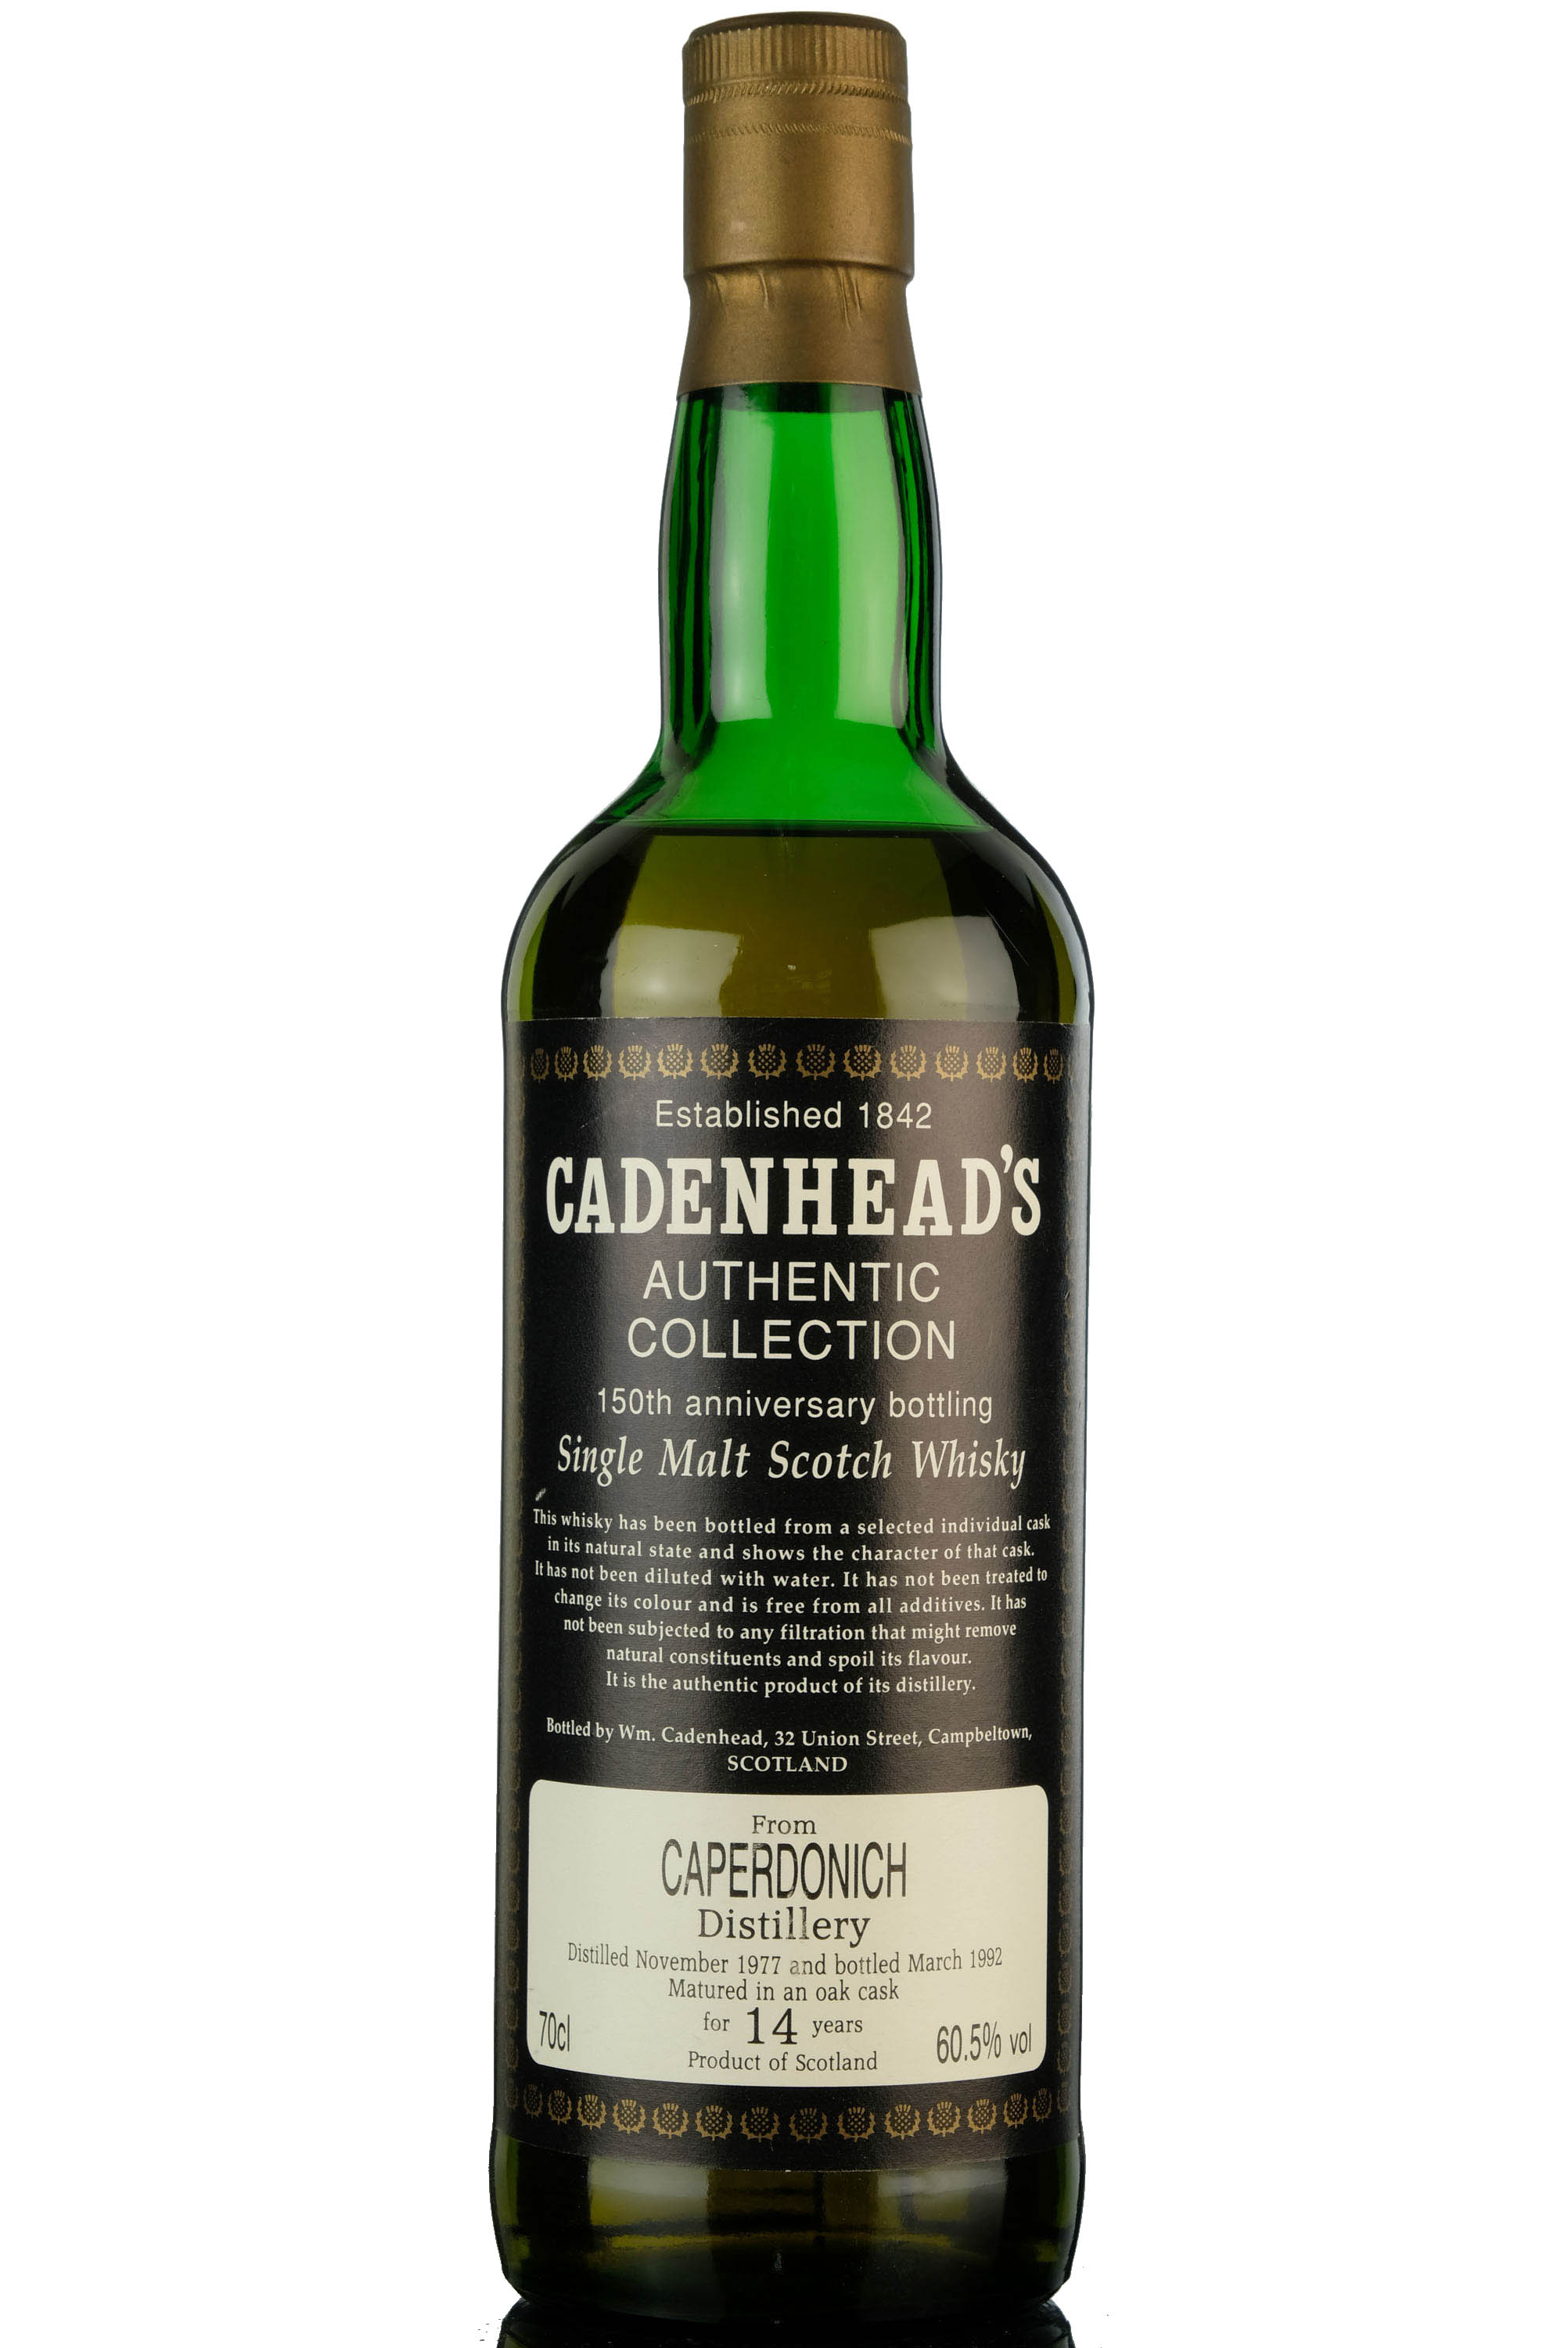 Caperdonich 1977-1992 - 14 Year Old - Cadenheads Authentic Collection